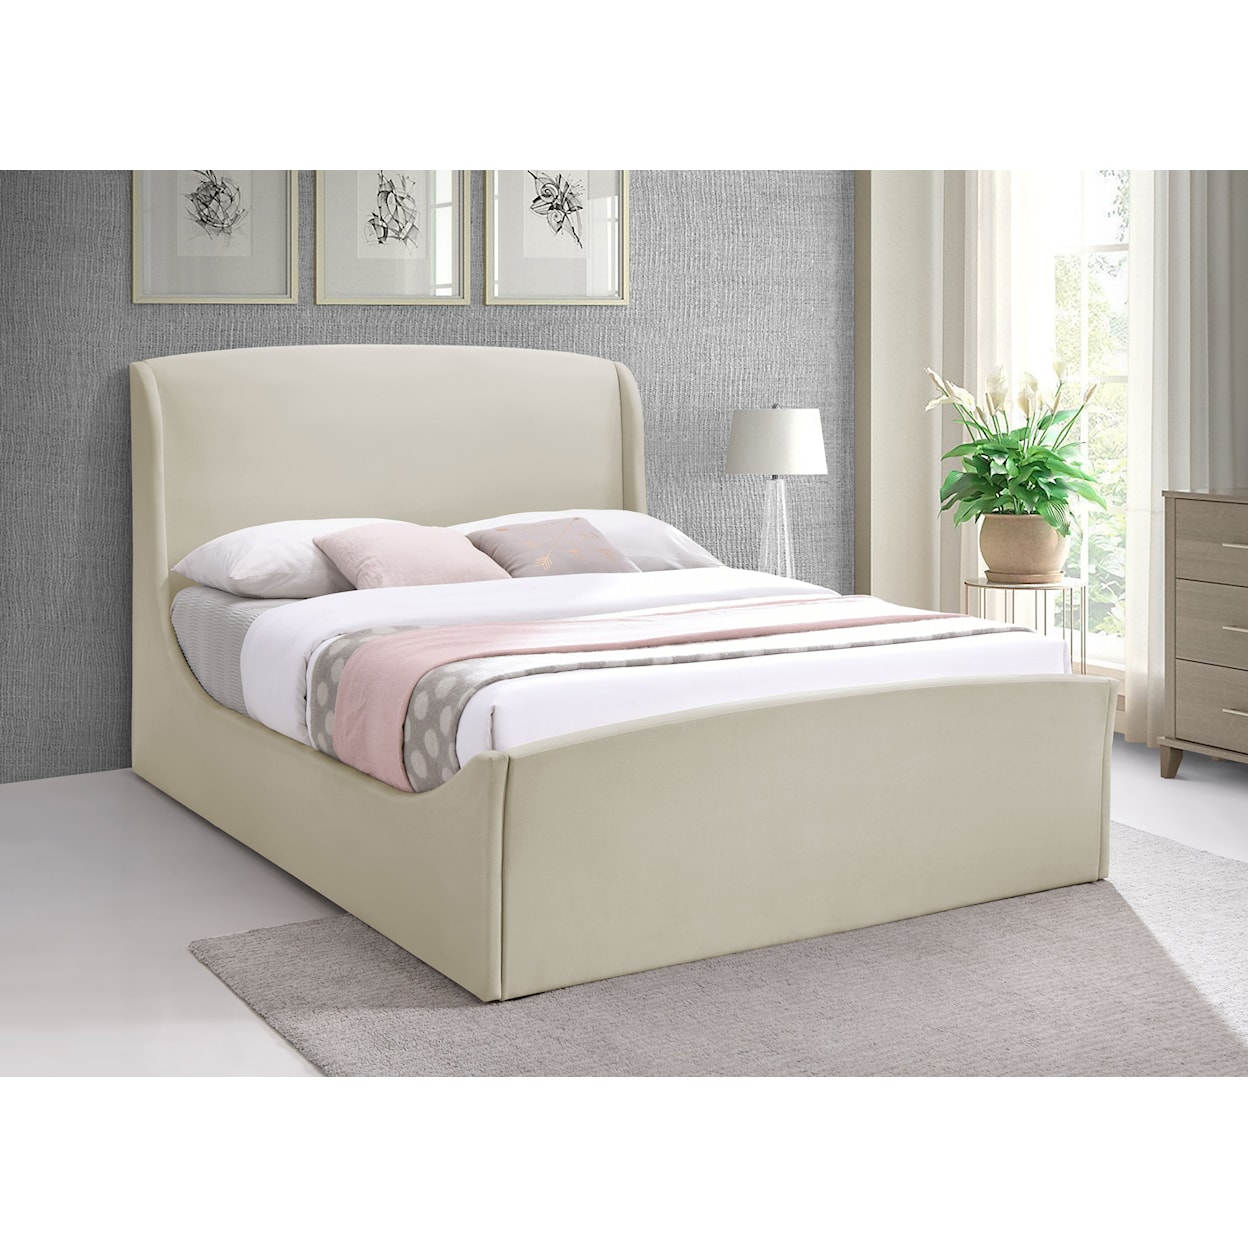 Meridian Furniture Tess Queen Bed (3 Boxes)